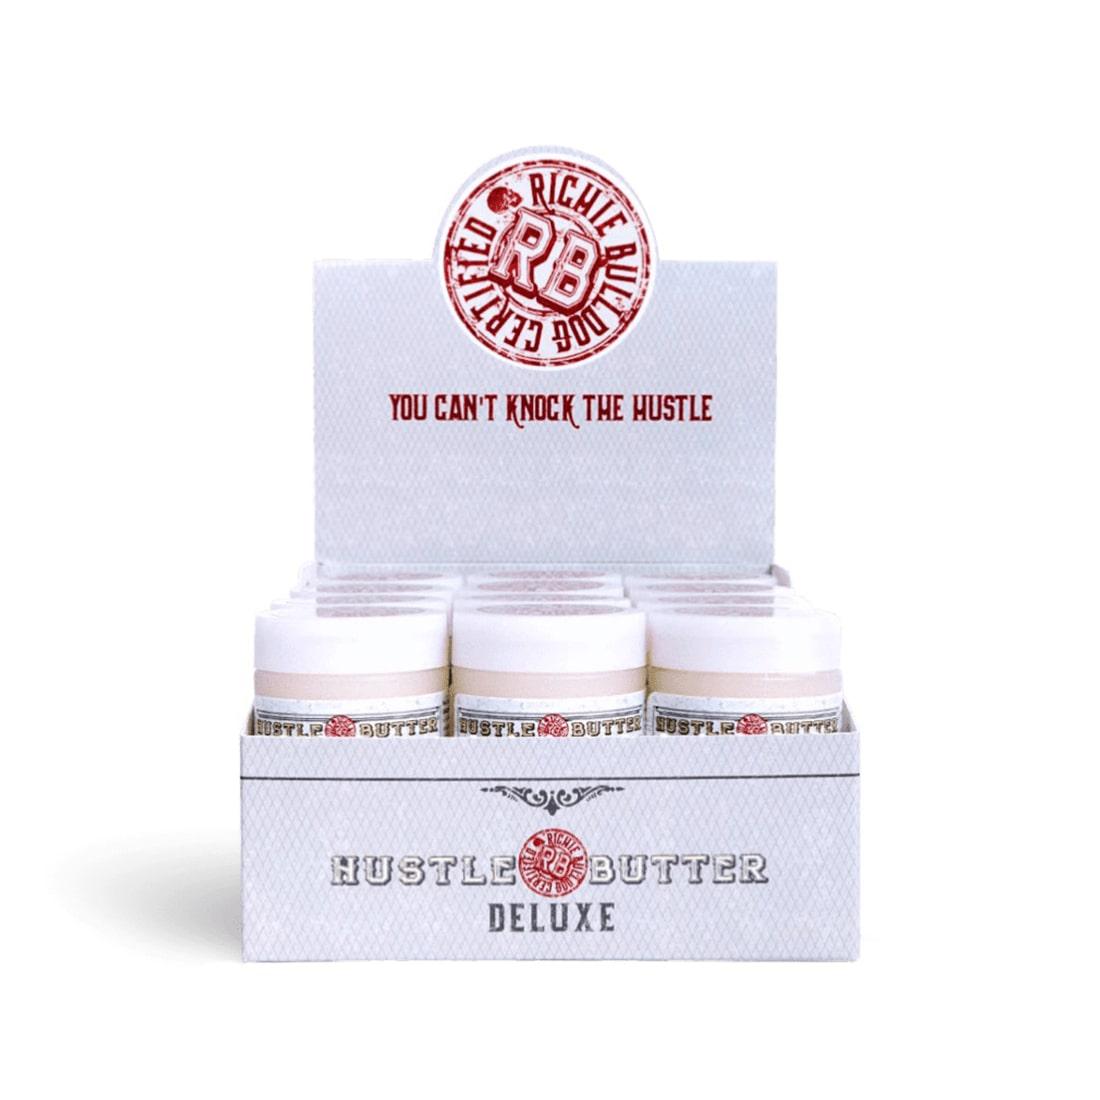 Hustle Butter Deluxe - Tattoo Care - FYT Tattoo Supplies Canada